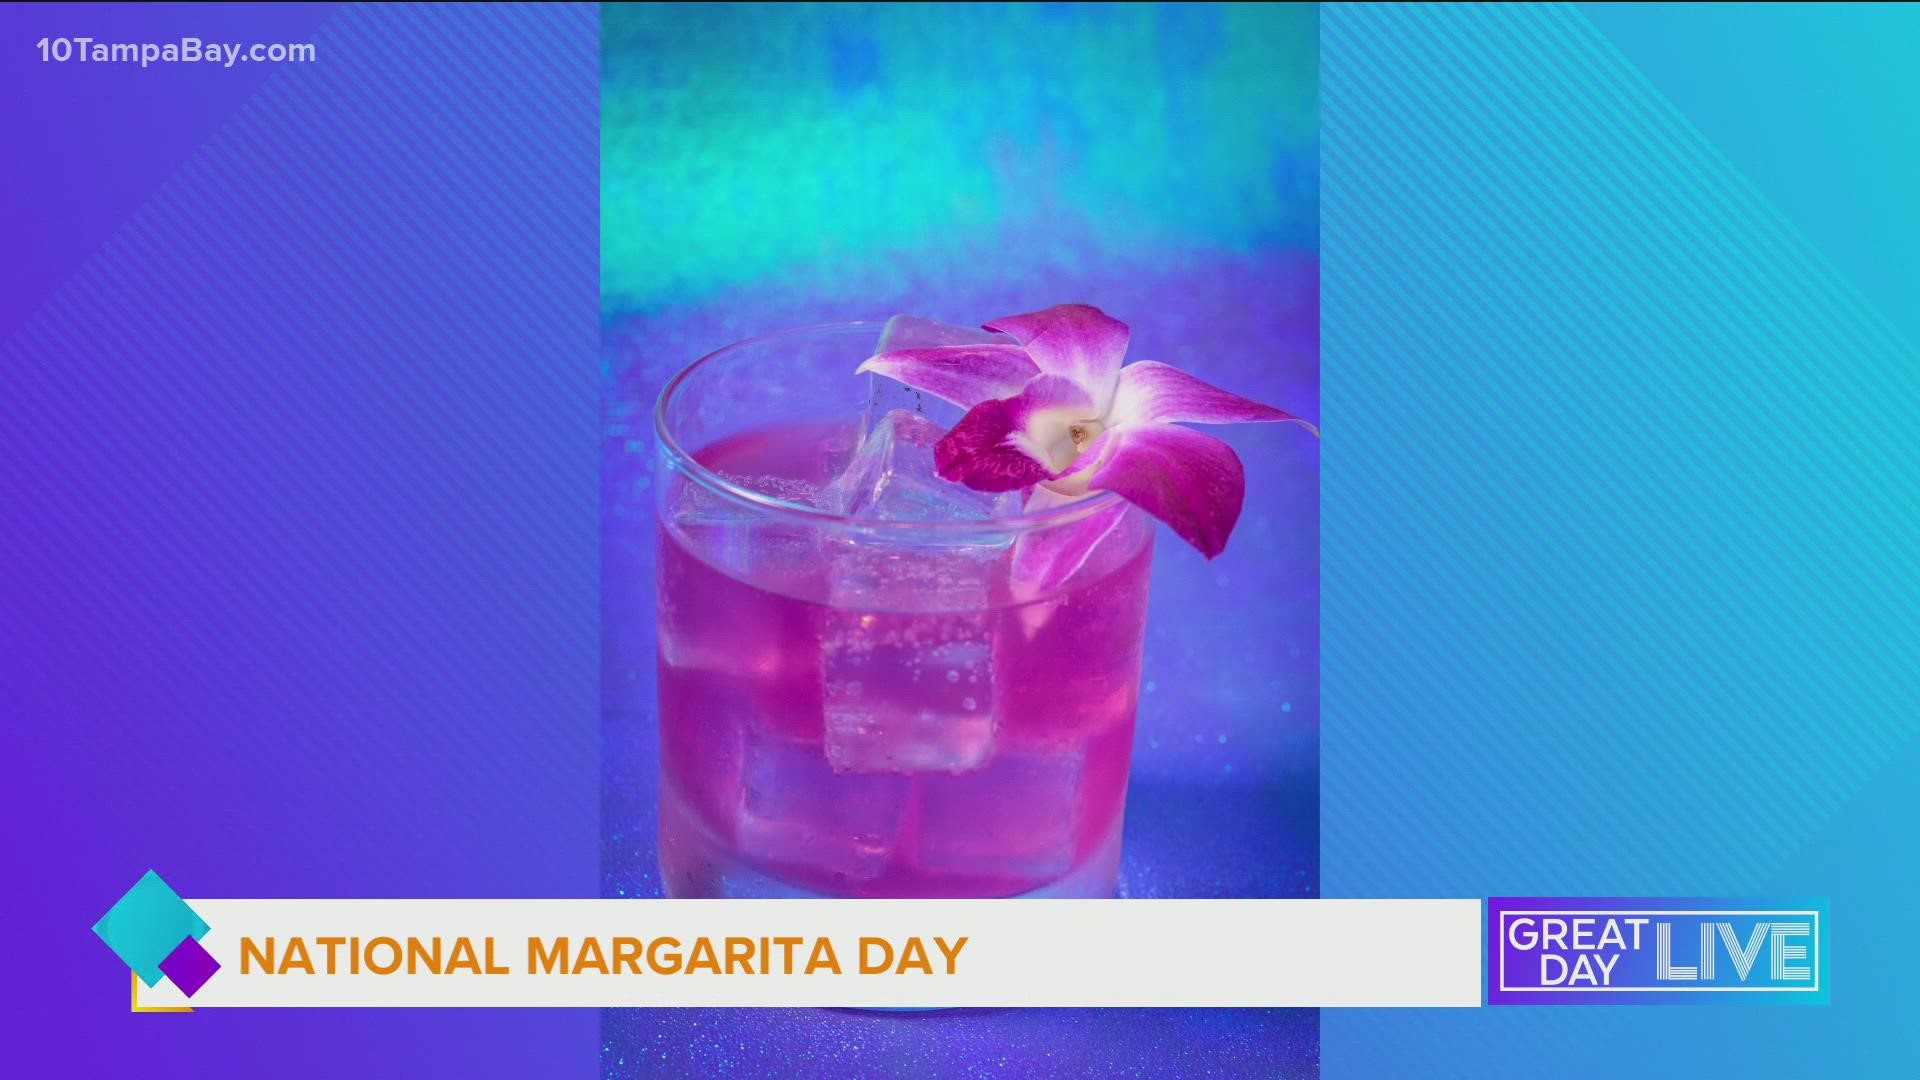 John Marchetti from DATZ shows us how to shake up the perfect Margarita!